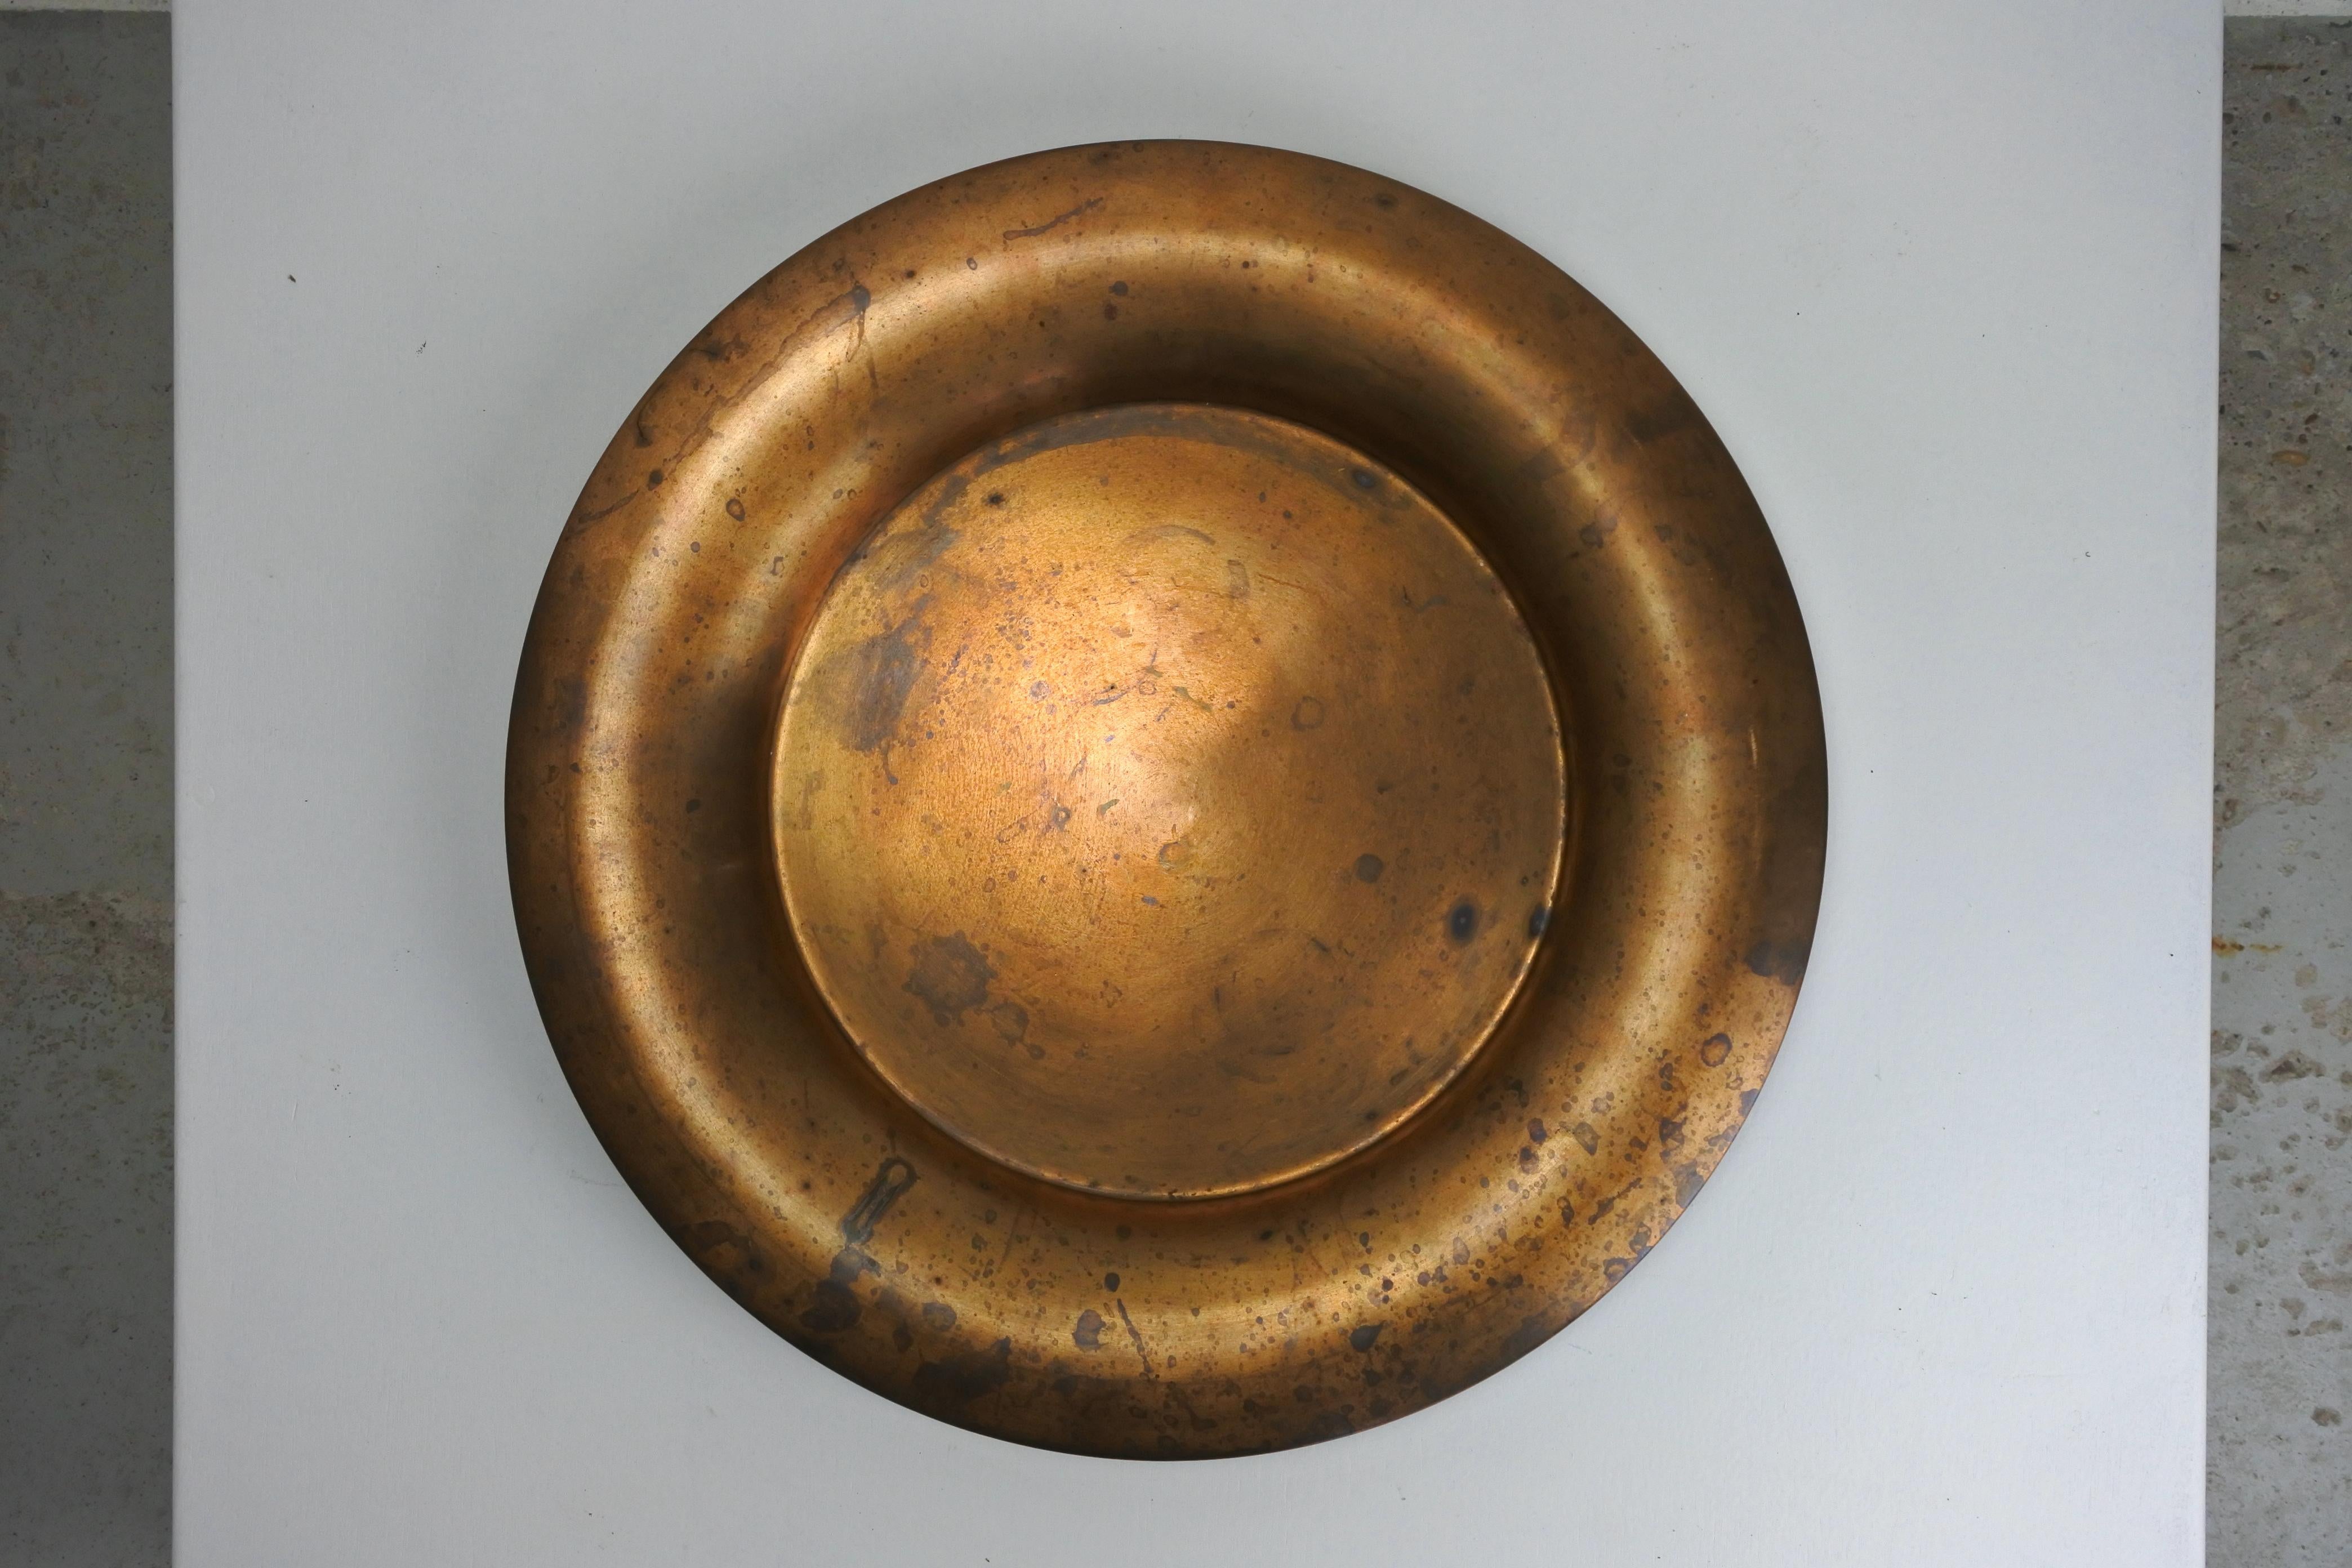 Large bronze dish or tray by Tapio Wirkkala.
Model TW479
Made by Kultakeskus Oy in Finland in the 1970s
Oustanding heavy patina on the bronze
Signed

Could be polished.